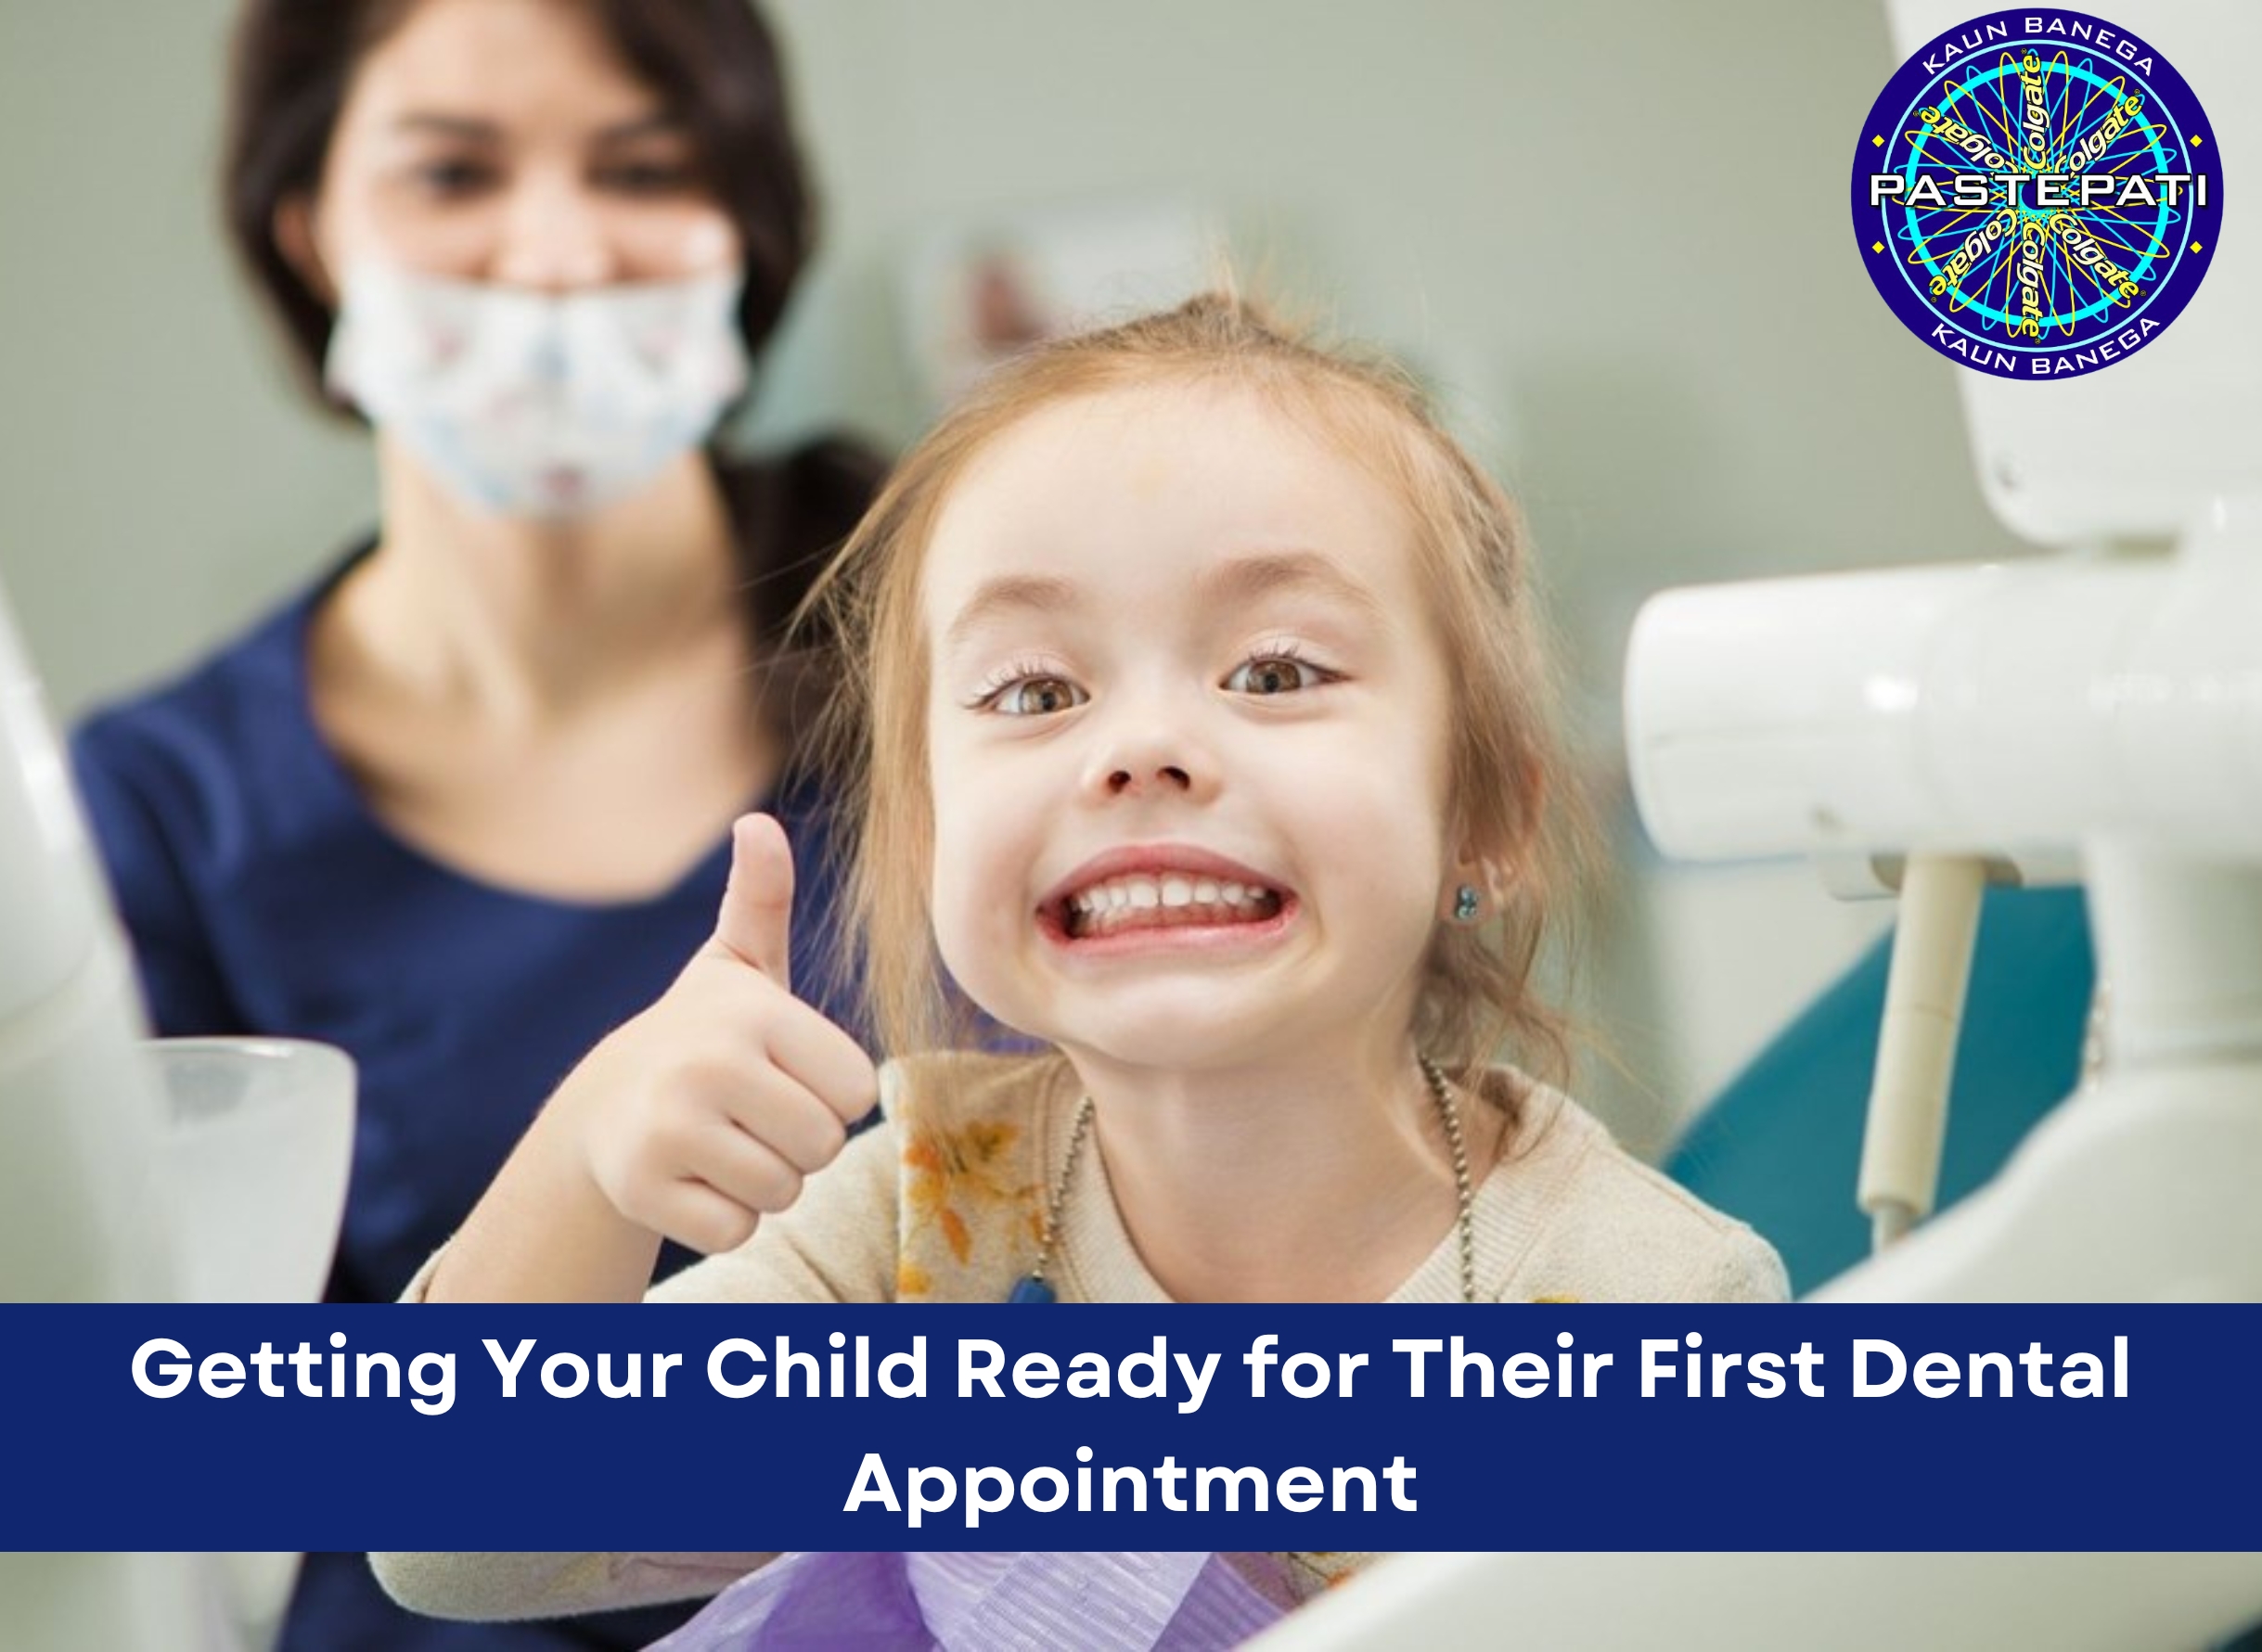 Getting Your Child Ready for Their First Dental Appointment